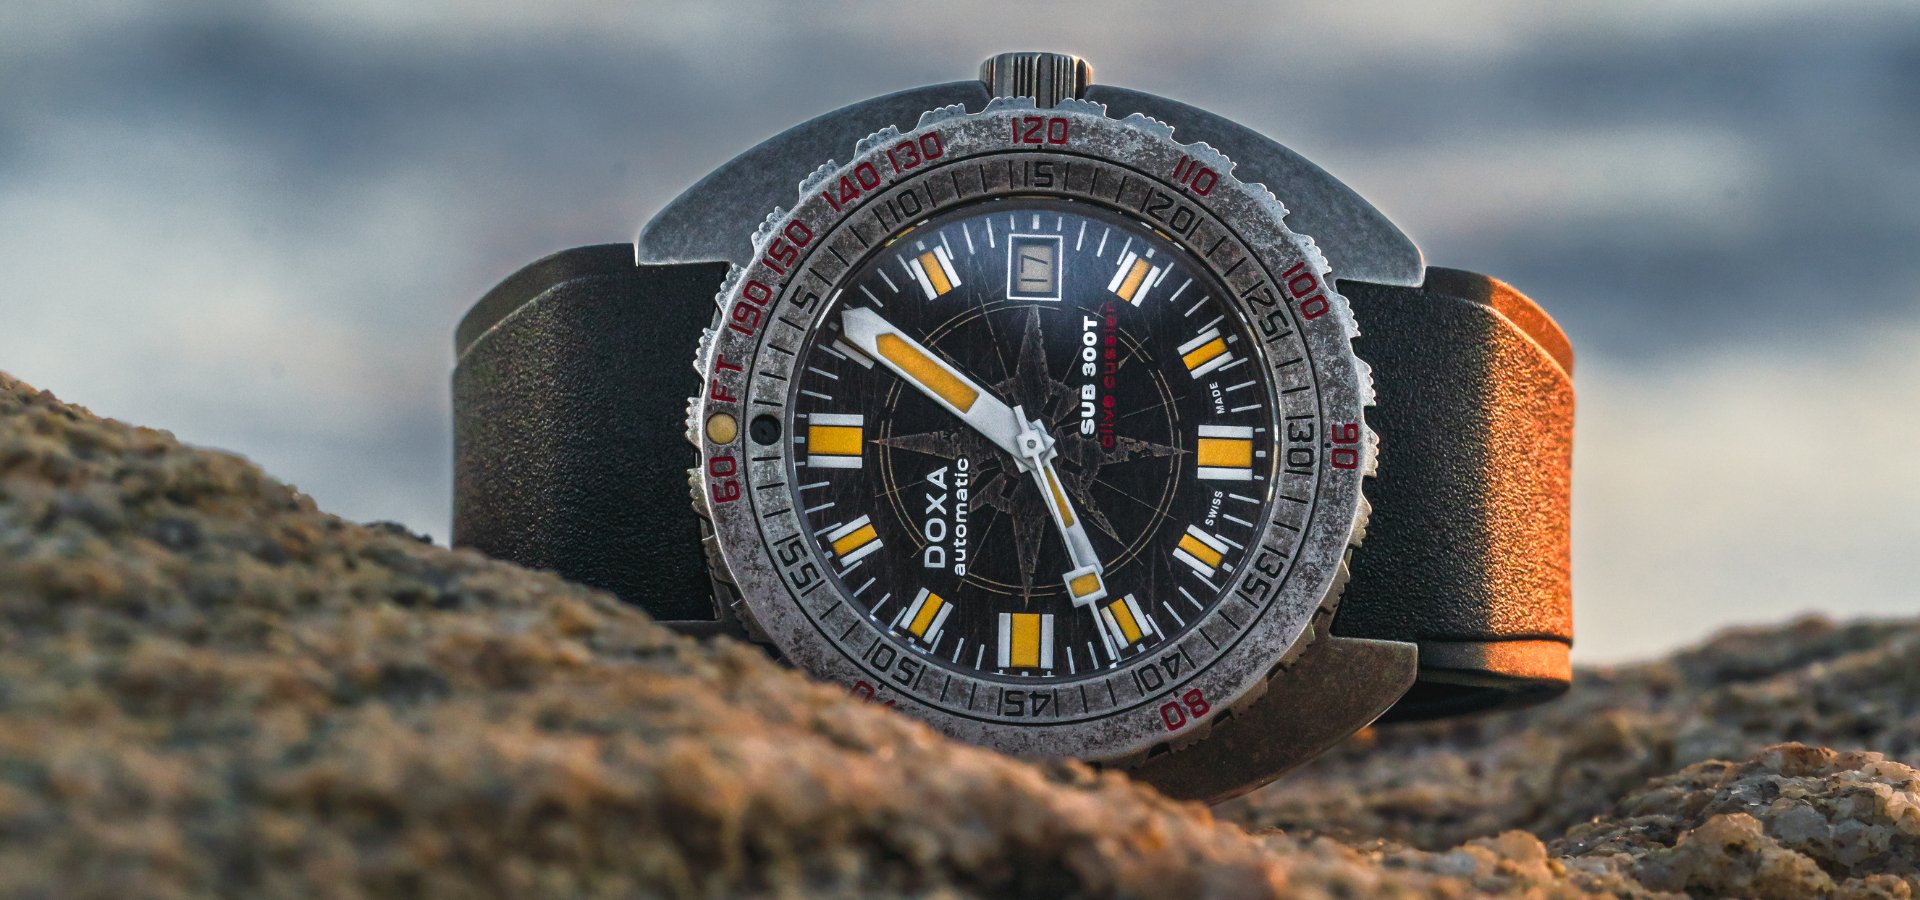 Celebrating Exploration and Legacy with The DOXA SUB 300T Sharkhunter Clive Cussler - DOXA Watches US